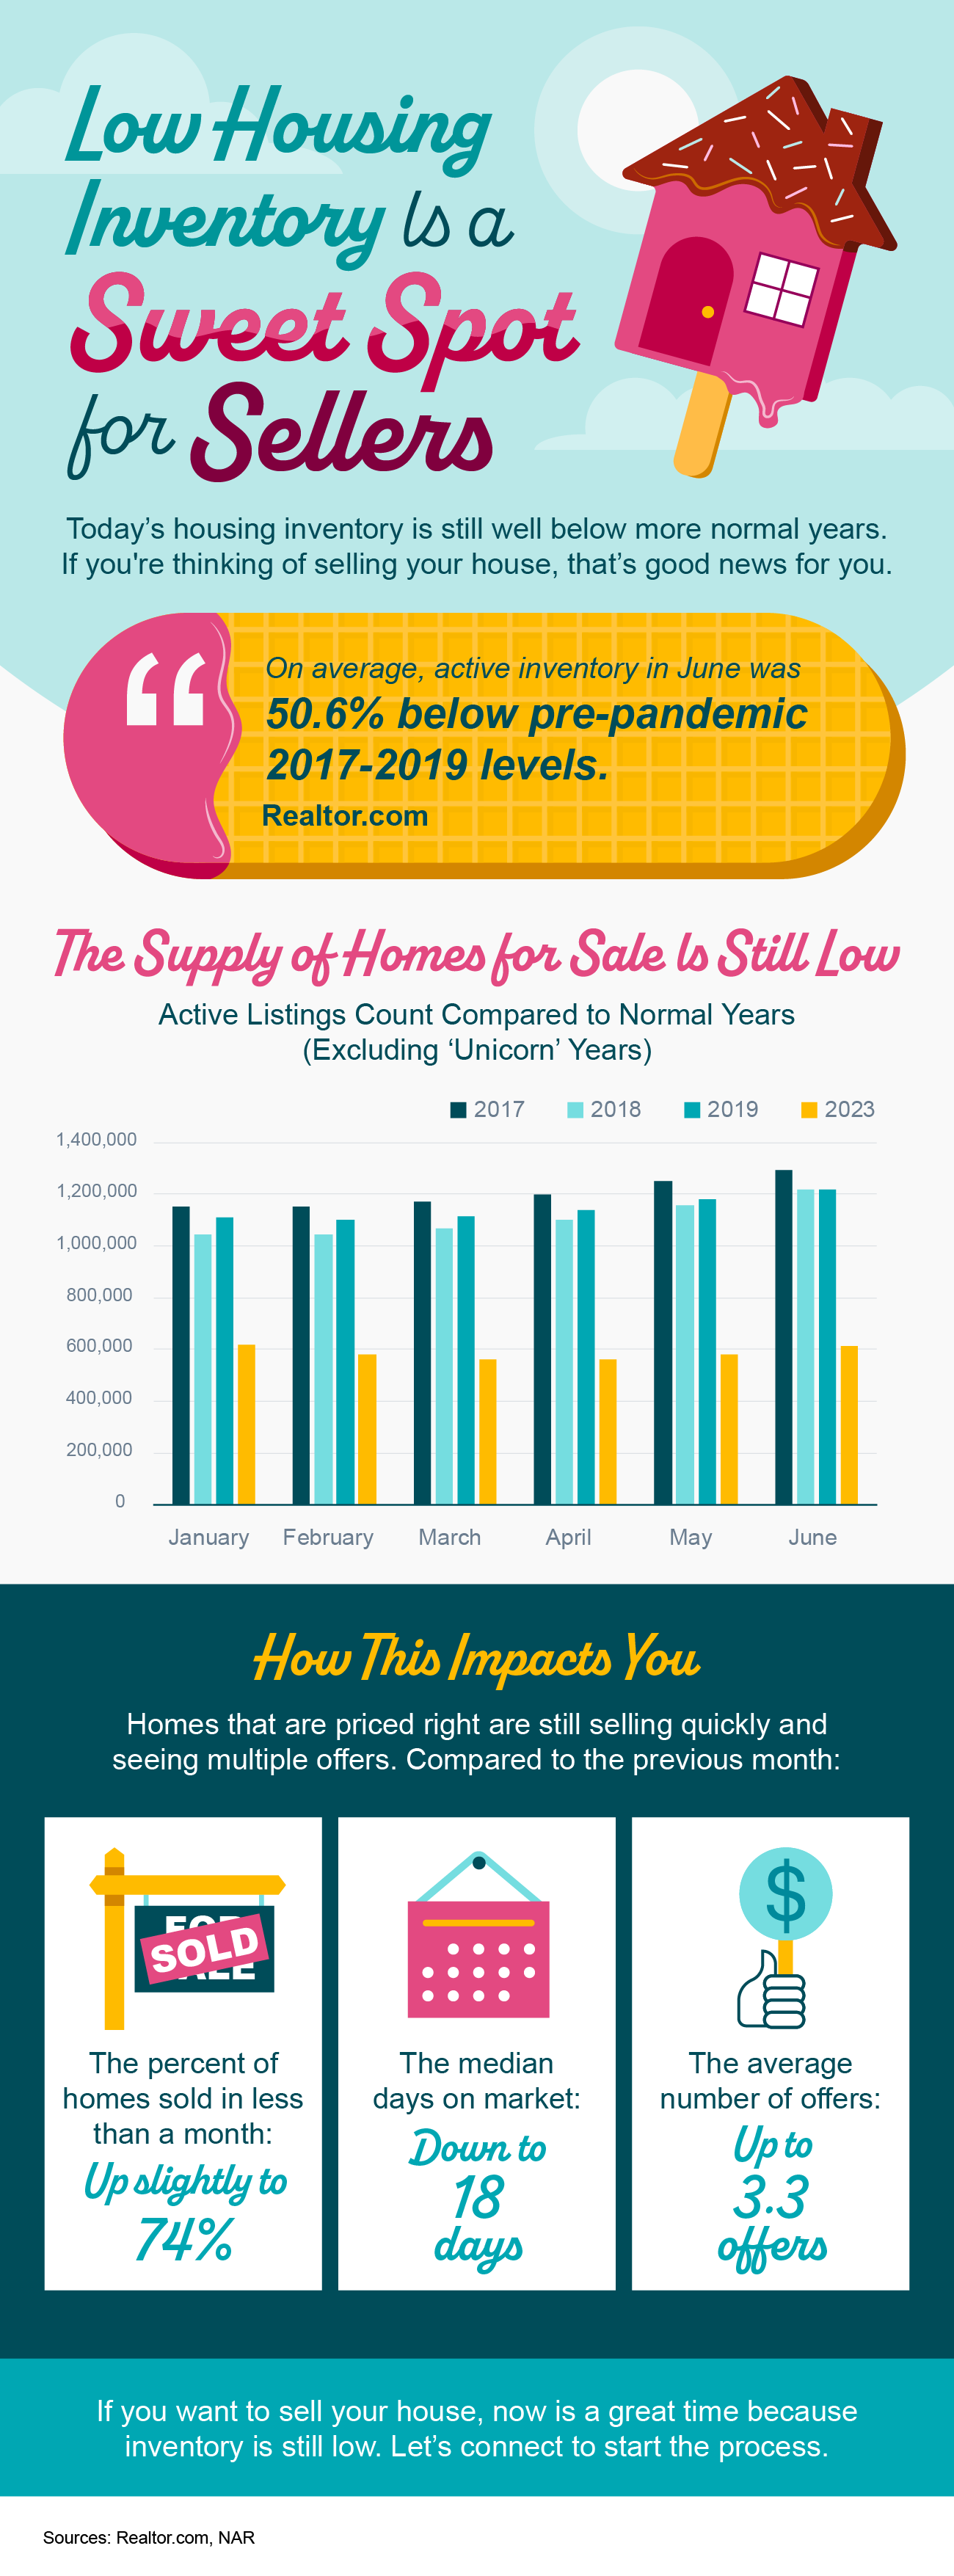 Low Housing Inventory Is a Sweet Spot for Sellers - KM Realty Group LLC, Chicago